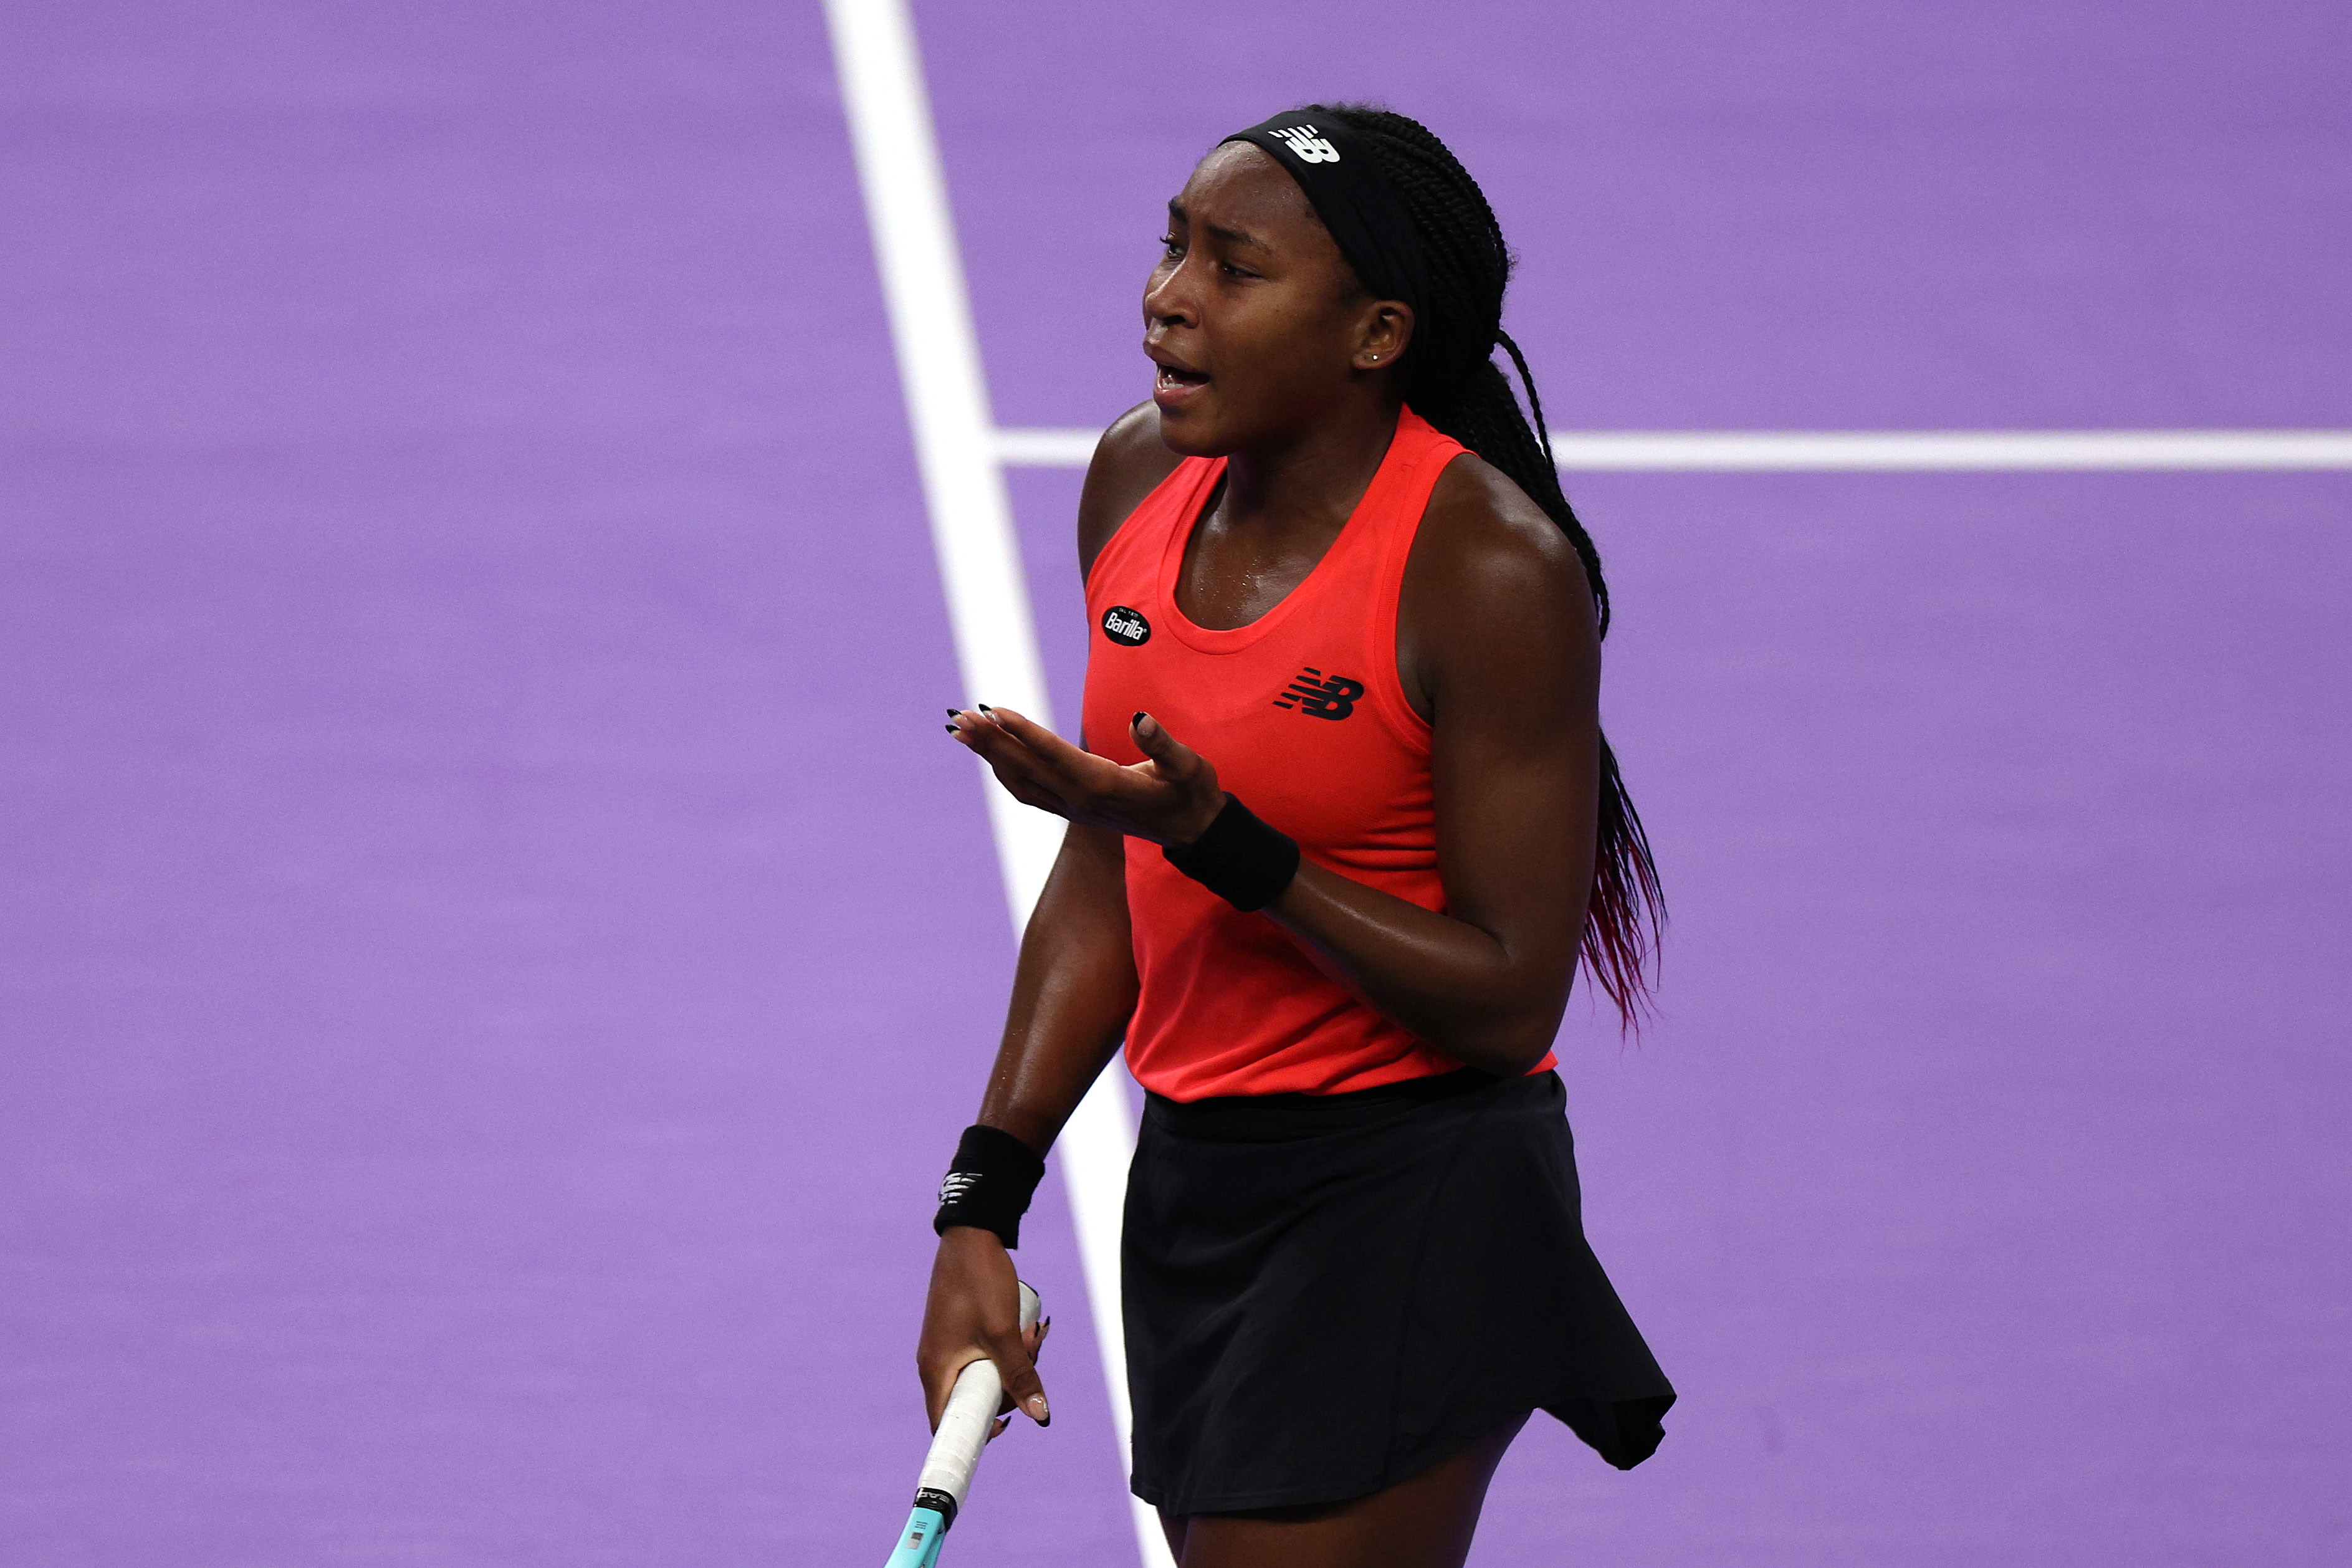 With 43 unforced errors, Coco Gauff is eliminated from title contention at the WTA Finals